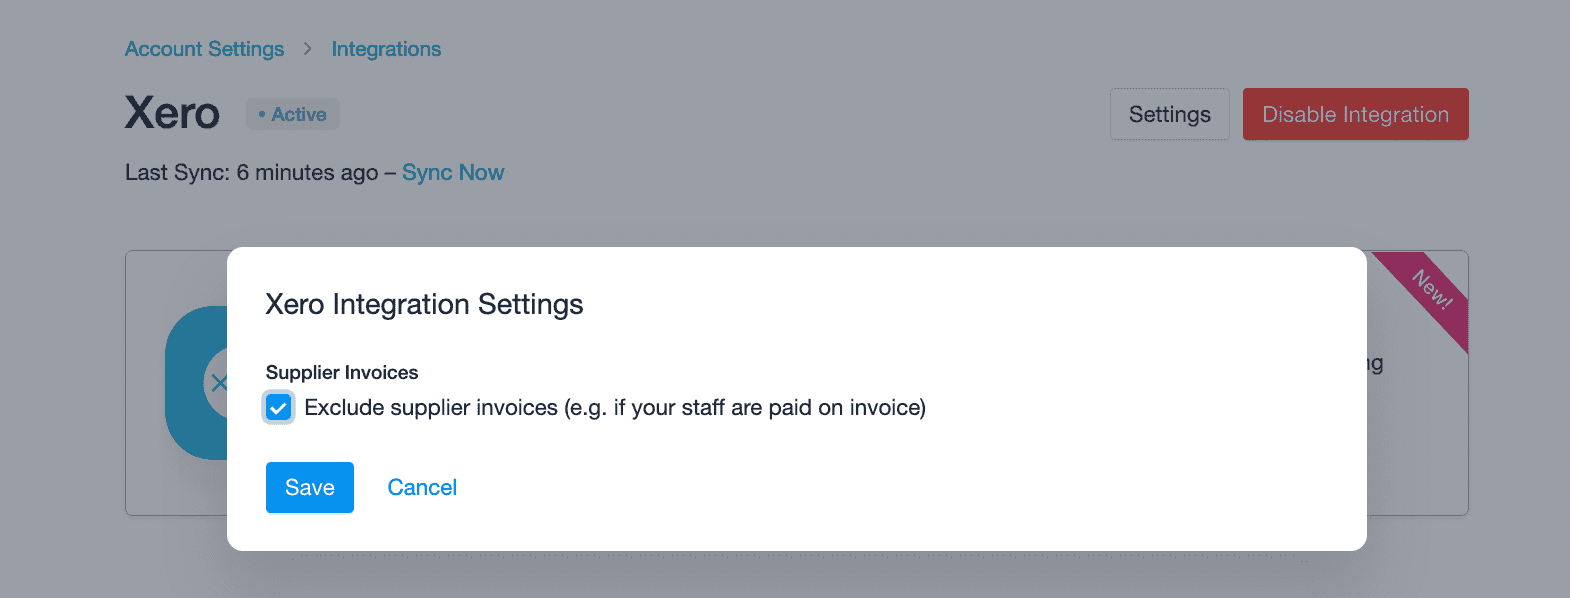 Xero integration settings with option to exclude supplier invoices